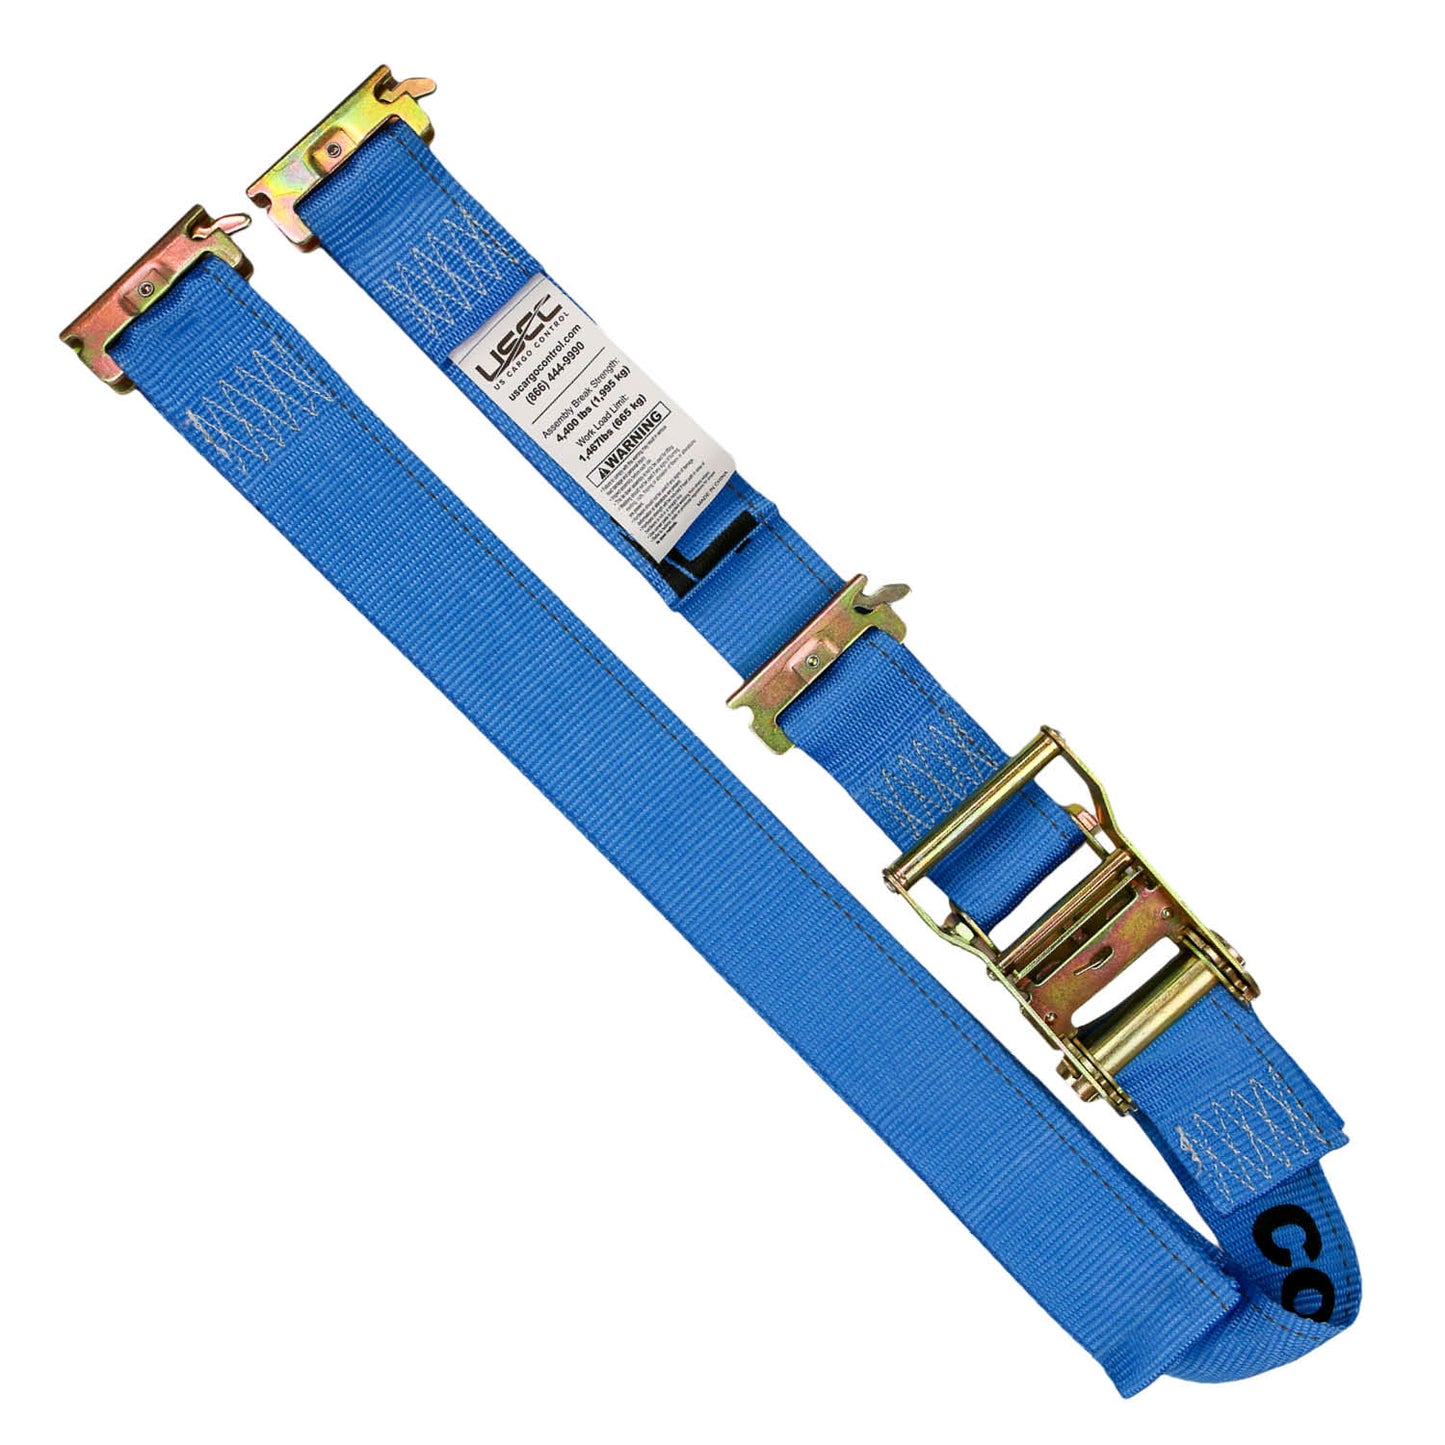 2" x 20' Blue E-Track Ratchet Strap w/ Double-Fitted End